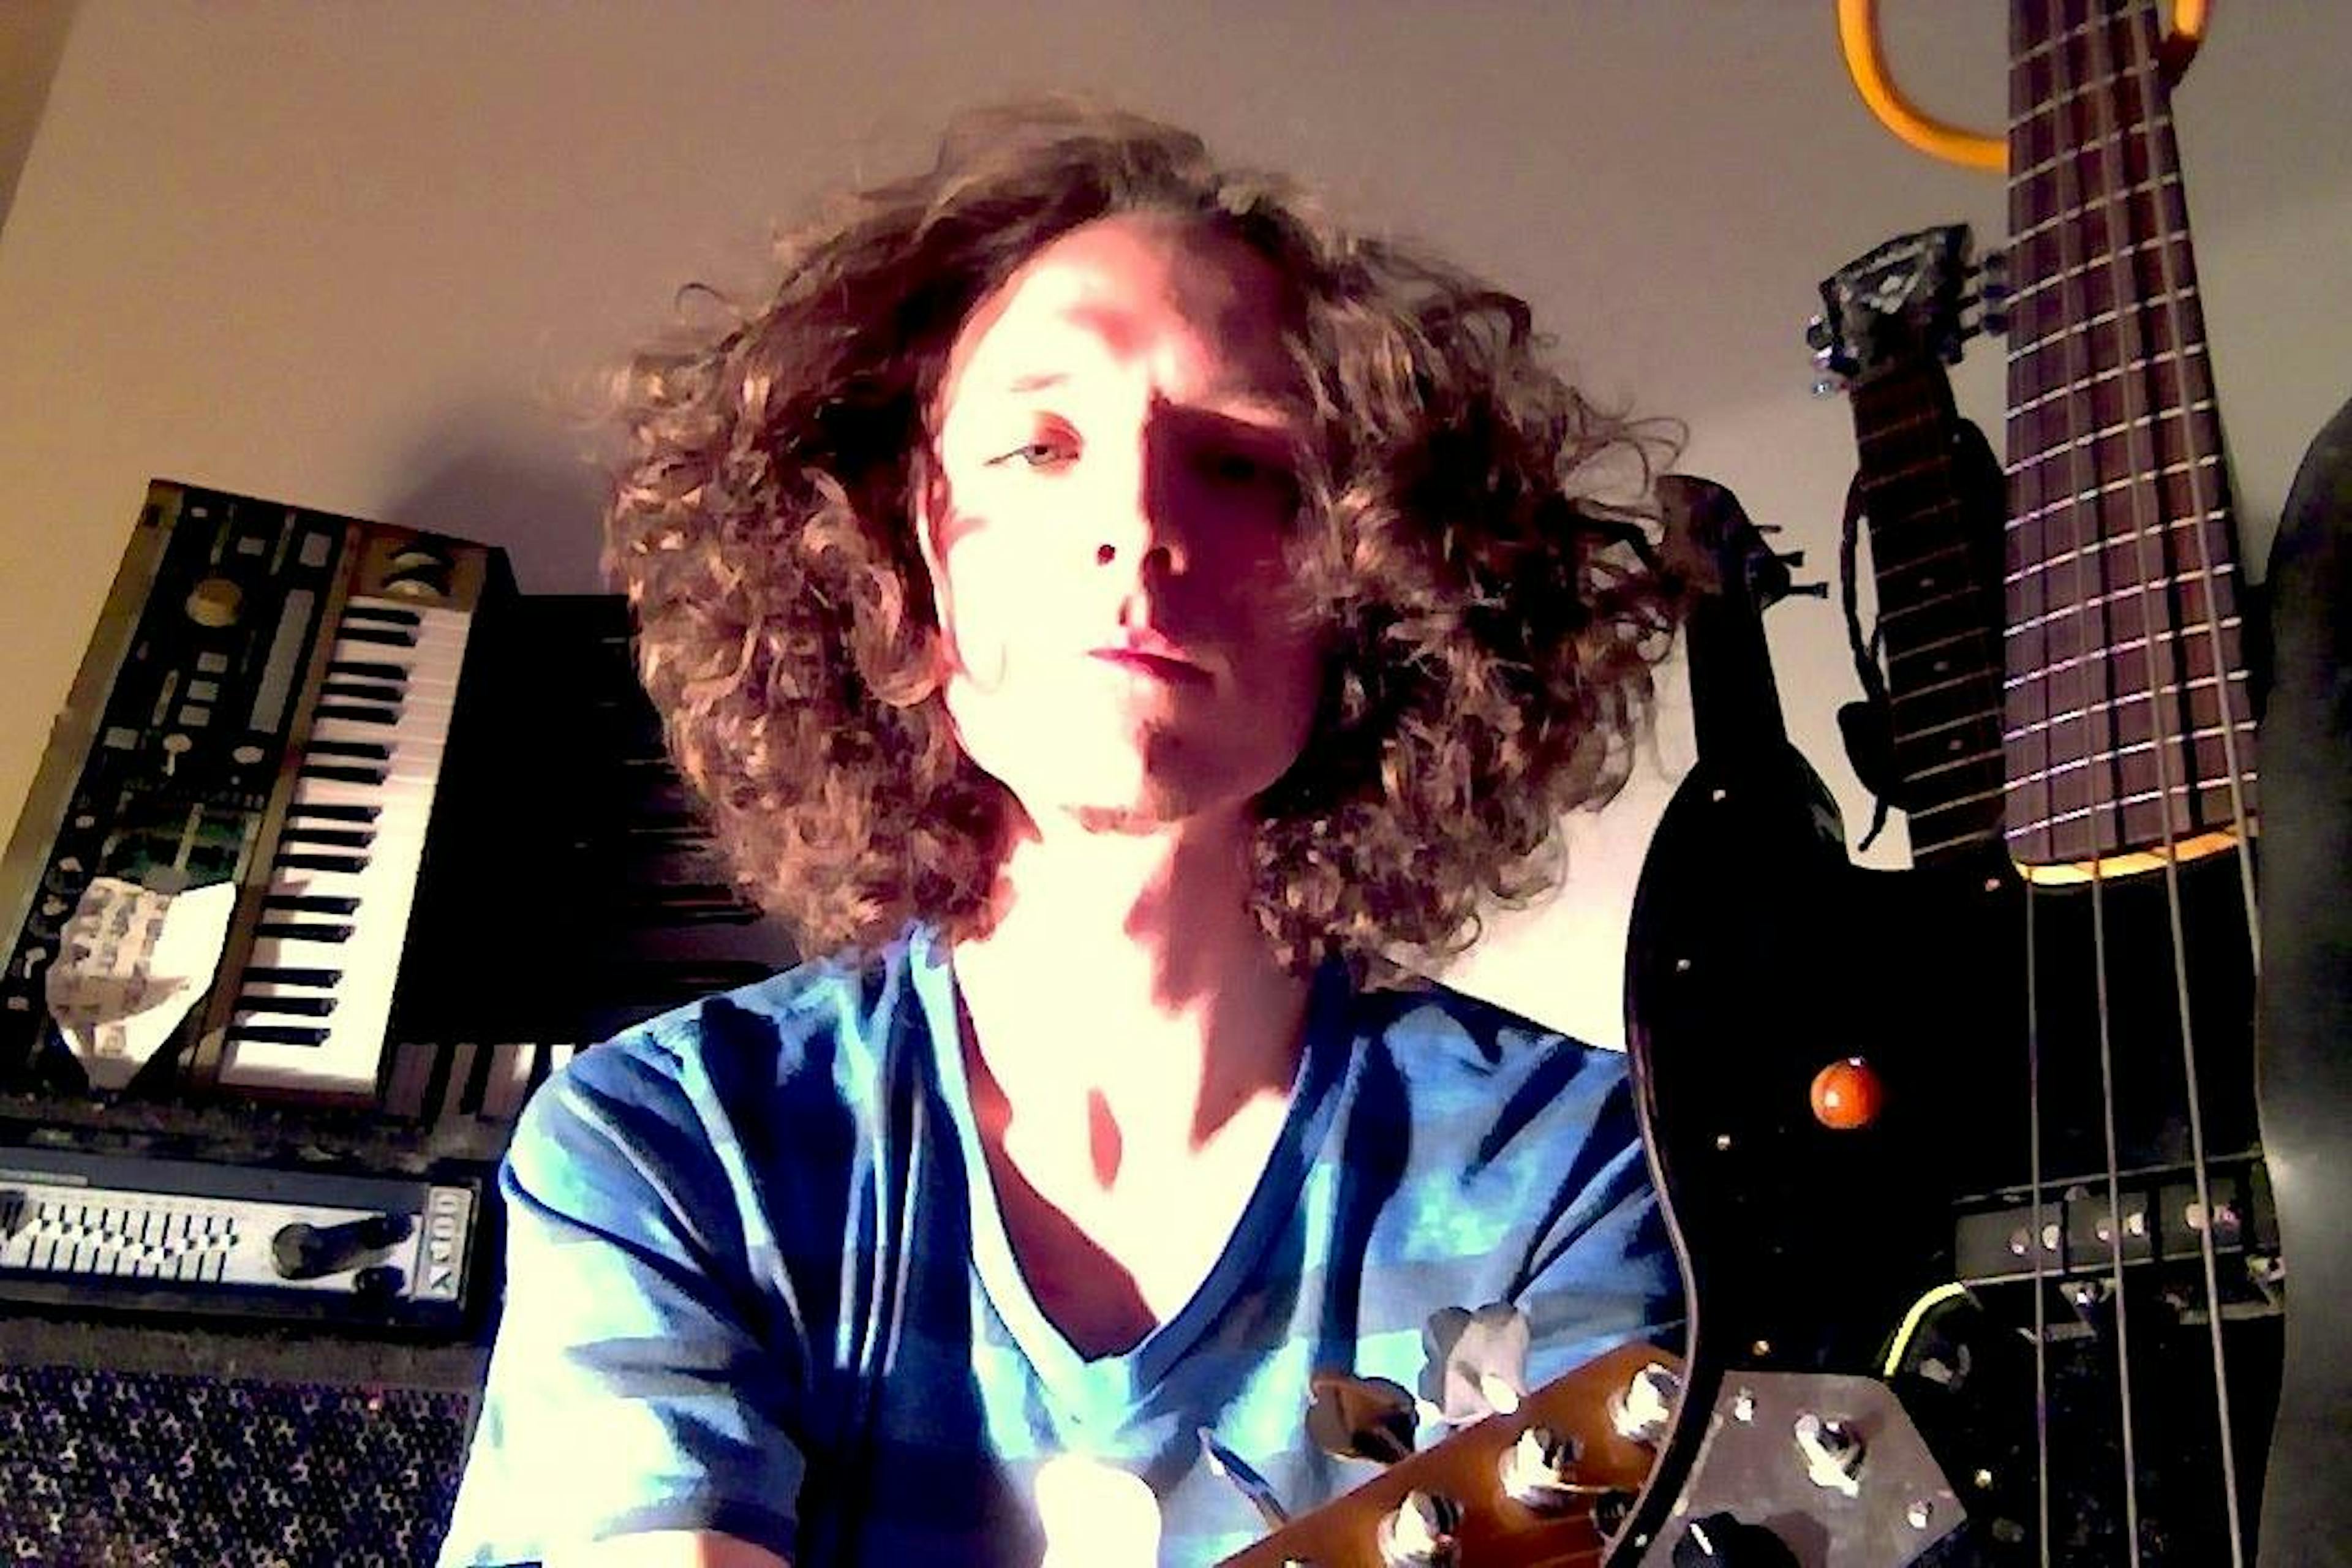 Headshot of Eric Smith - a person looking down towards the camera, they have curly hair that reaches the nape of their neck. They're wearin ga blue striped t shirt and are surrounded with musical instruments including an amp, an electric guitar, and an electric keyboard